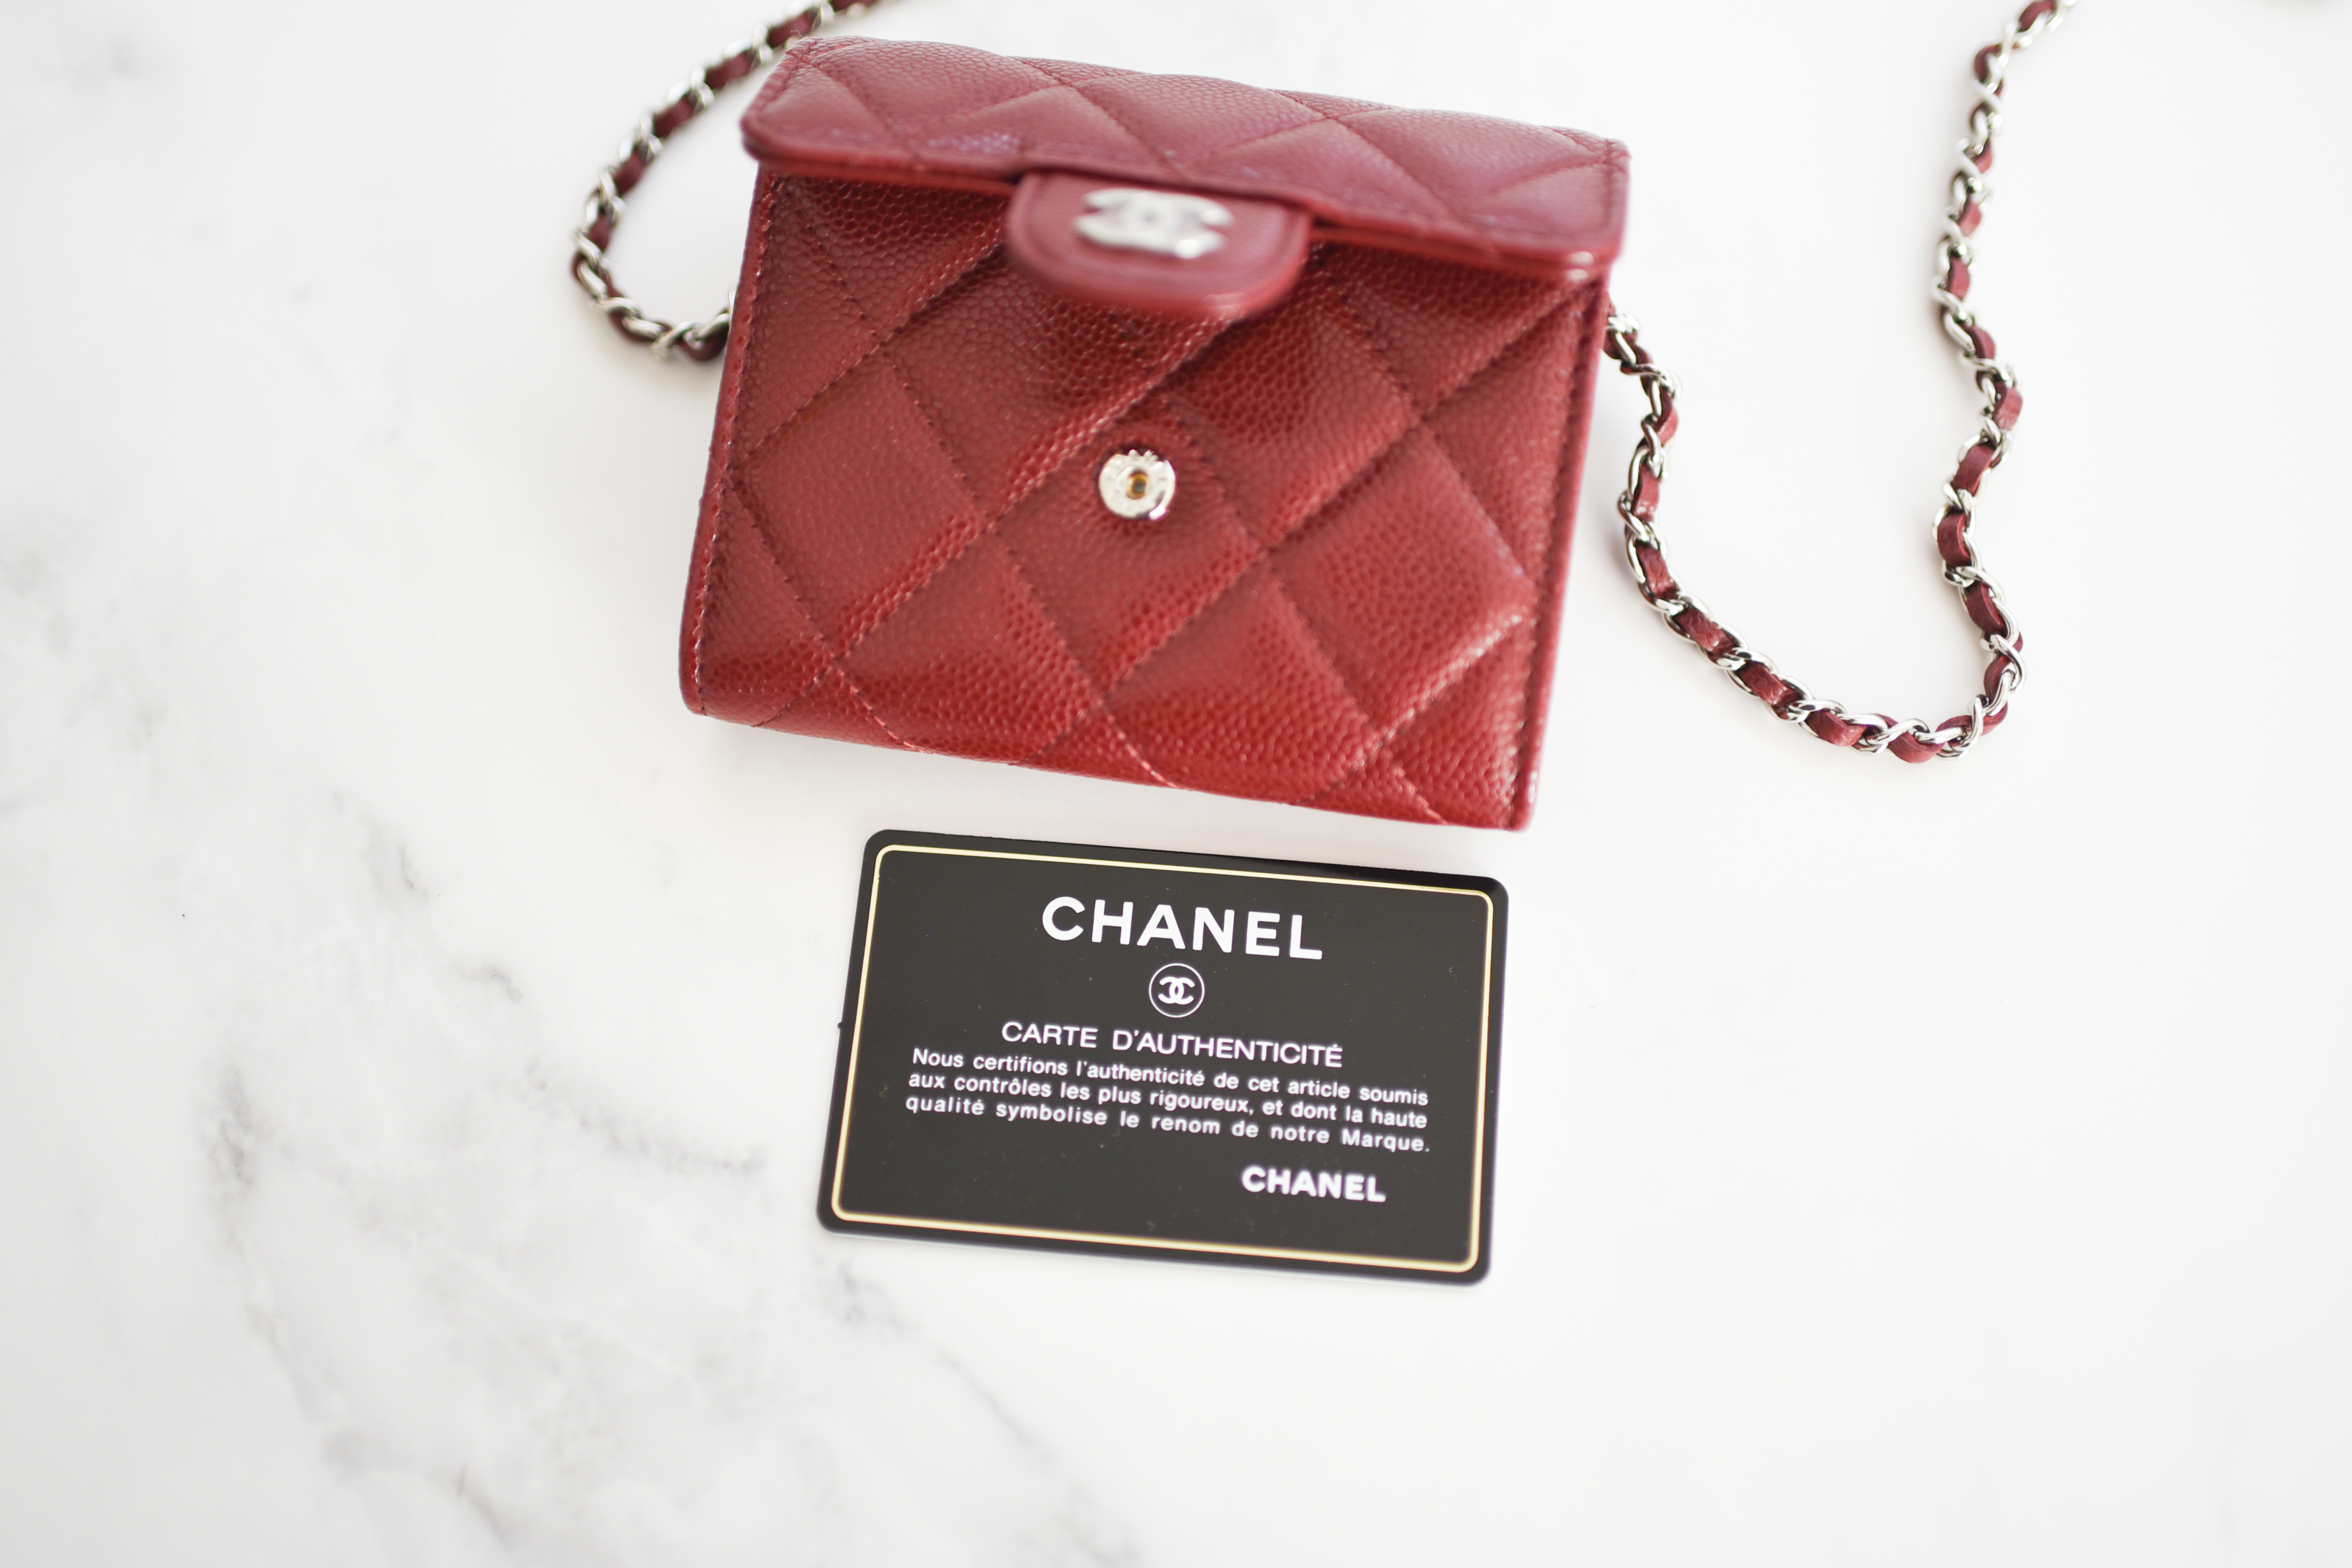 Chanel SLG Card Holder With Chain, Burgundy Caviar Leather, Gold Hardware,  New in Box - Julia Rose Boston